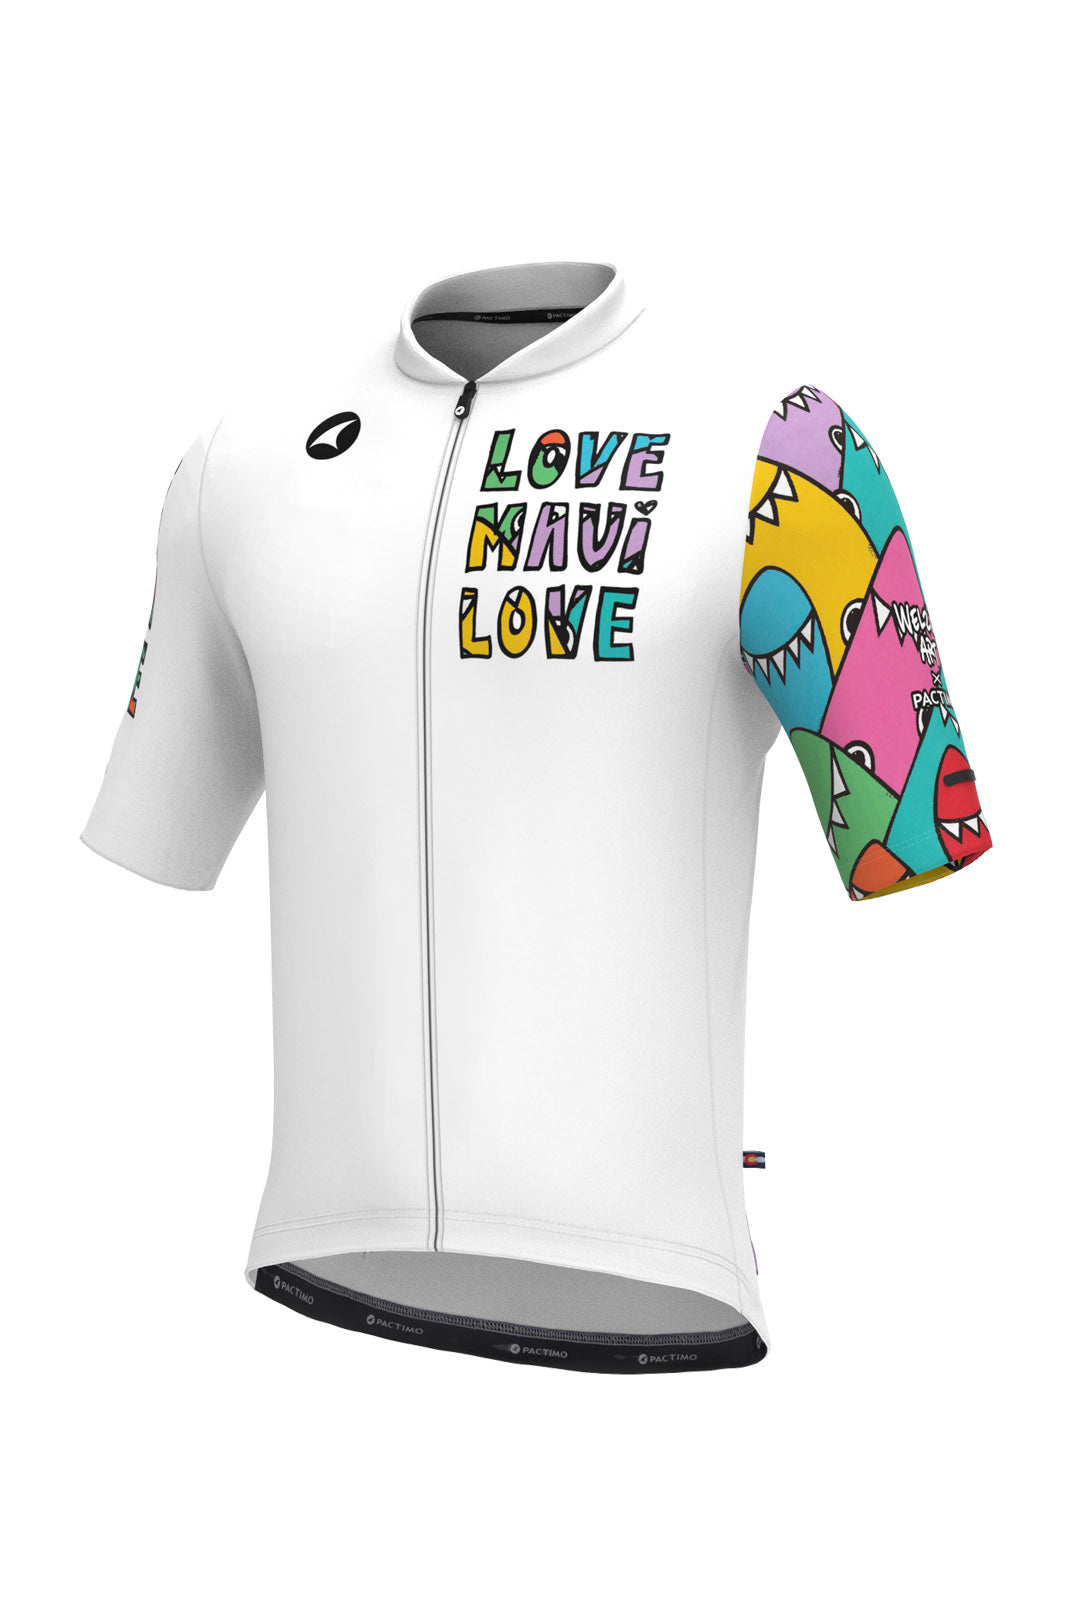 Maui Relief Cycling Jersey for Men - Welzie Design Front View